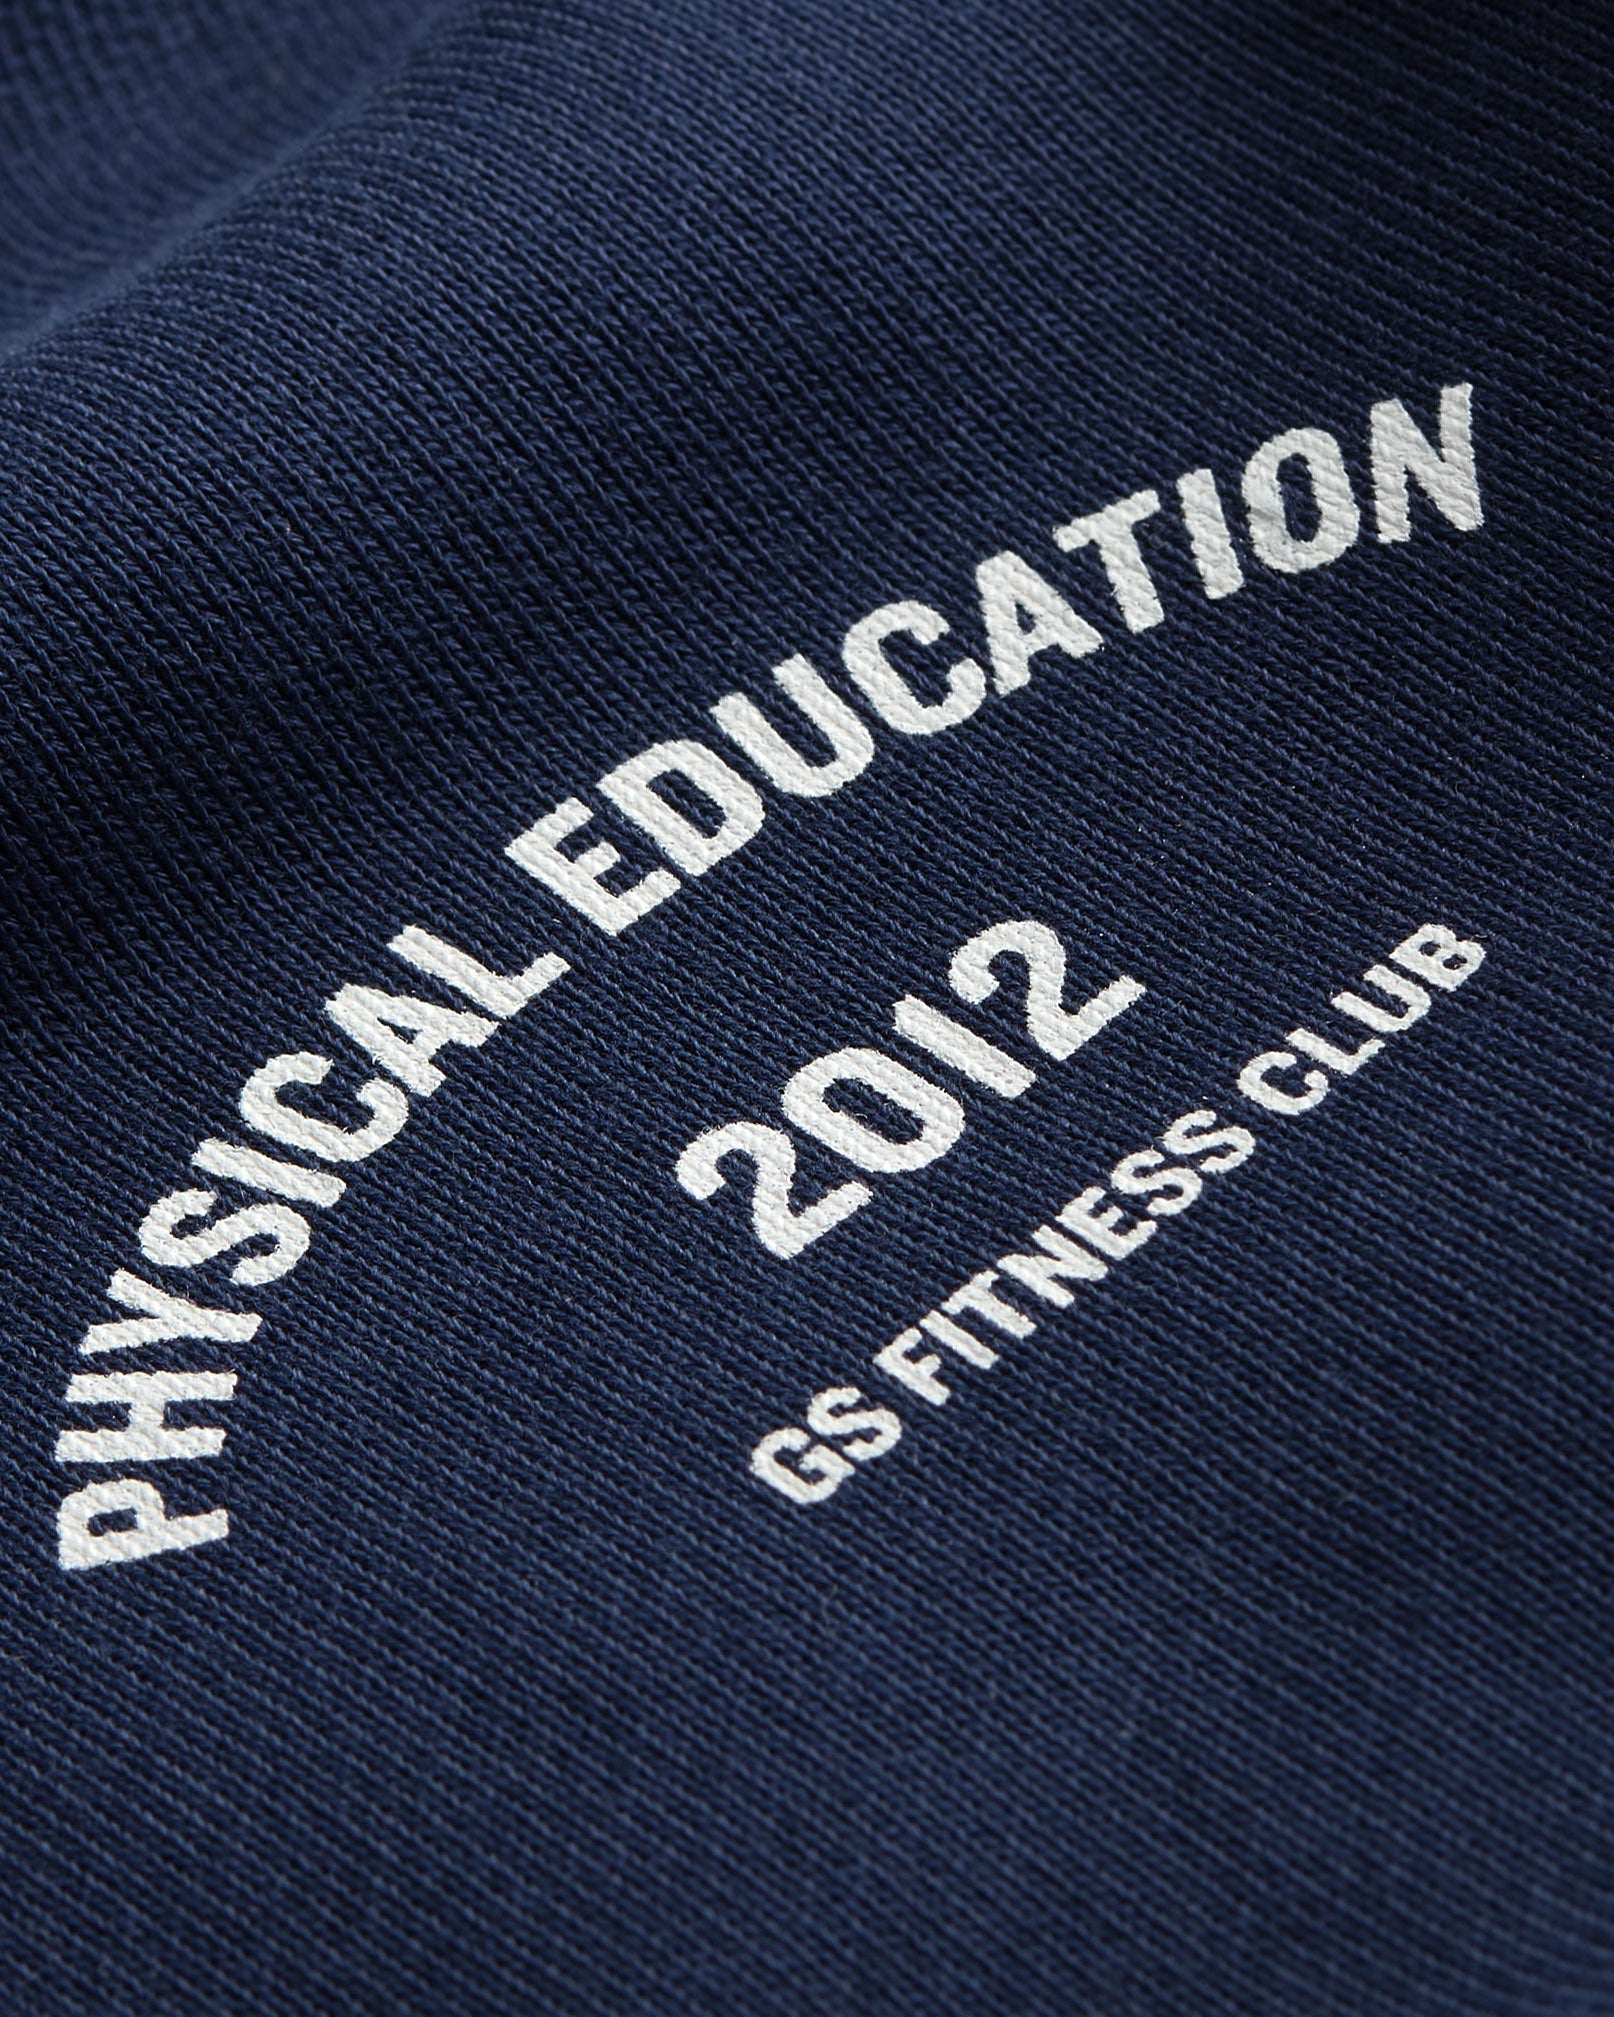 Phys Ed Graphic Hoodie in Blue - view 5